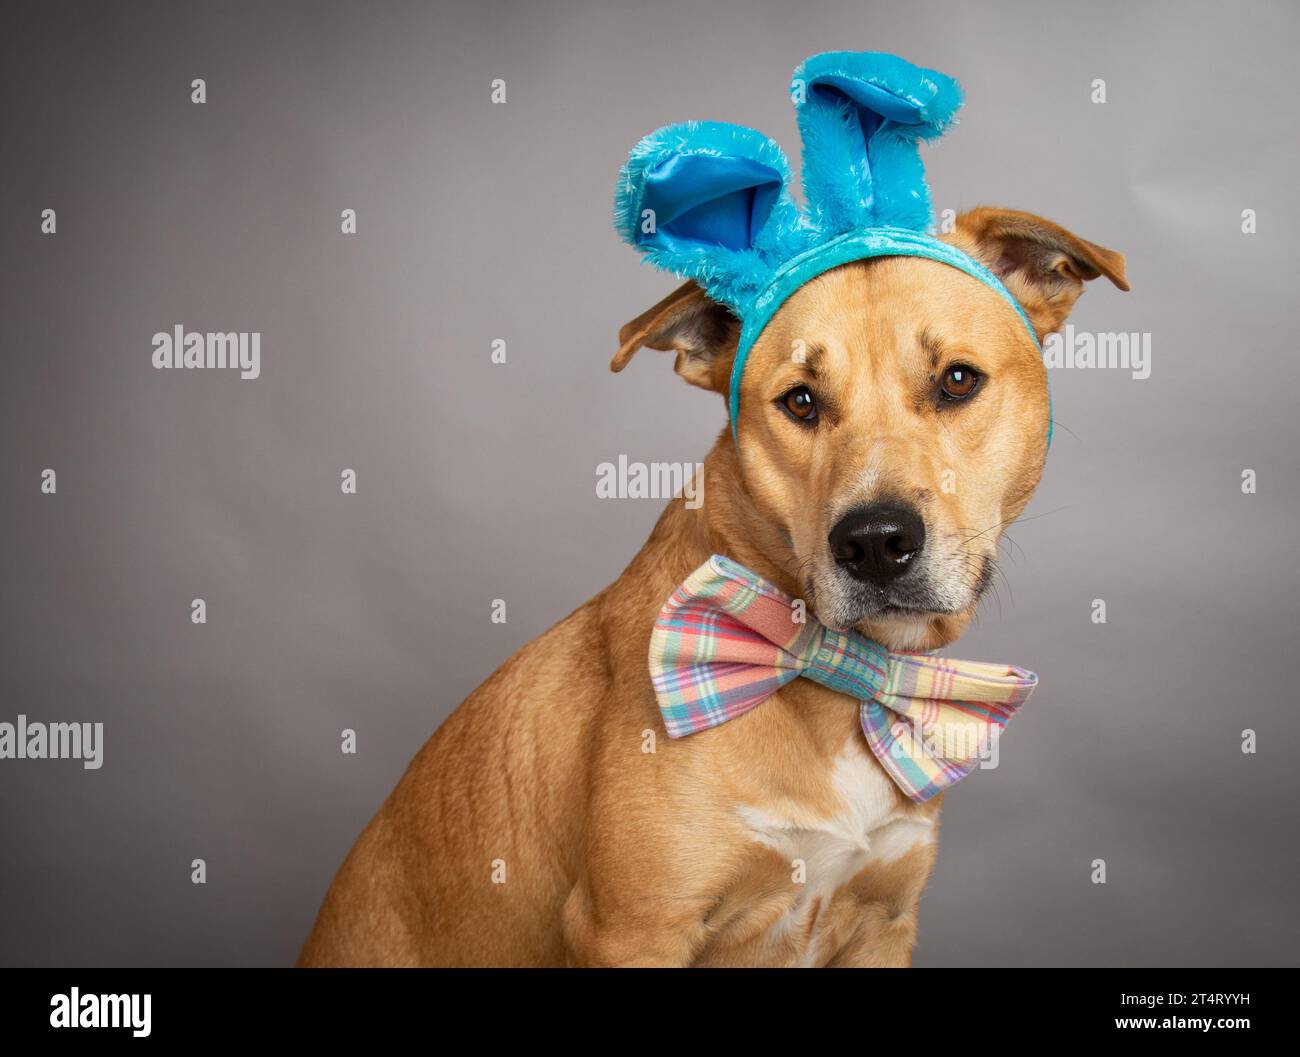 Portrait of a labrador retriever wearing bunny ears and a bow tie Stock Photo